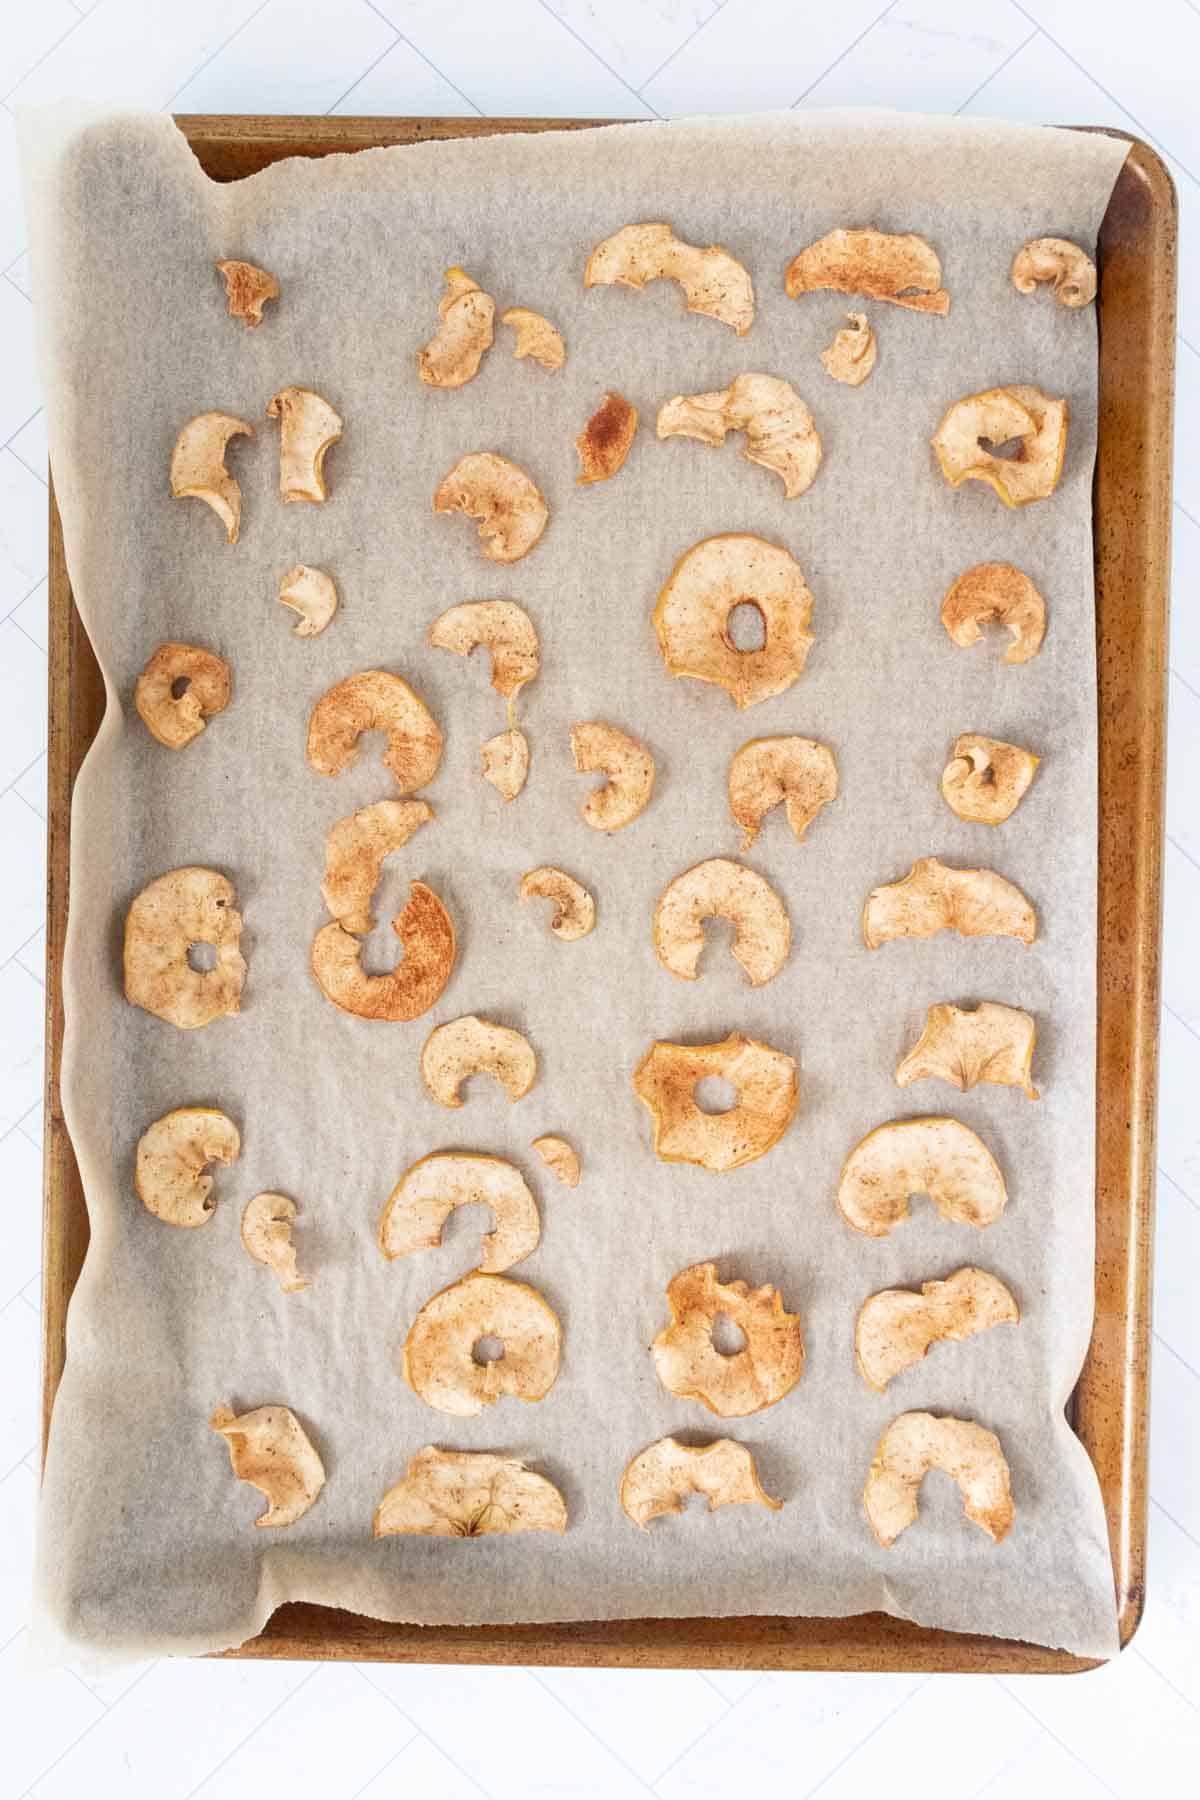 Apple chips on a baking sheet.